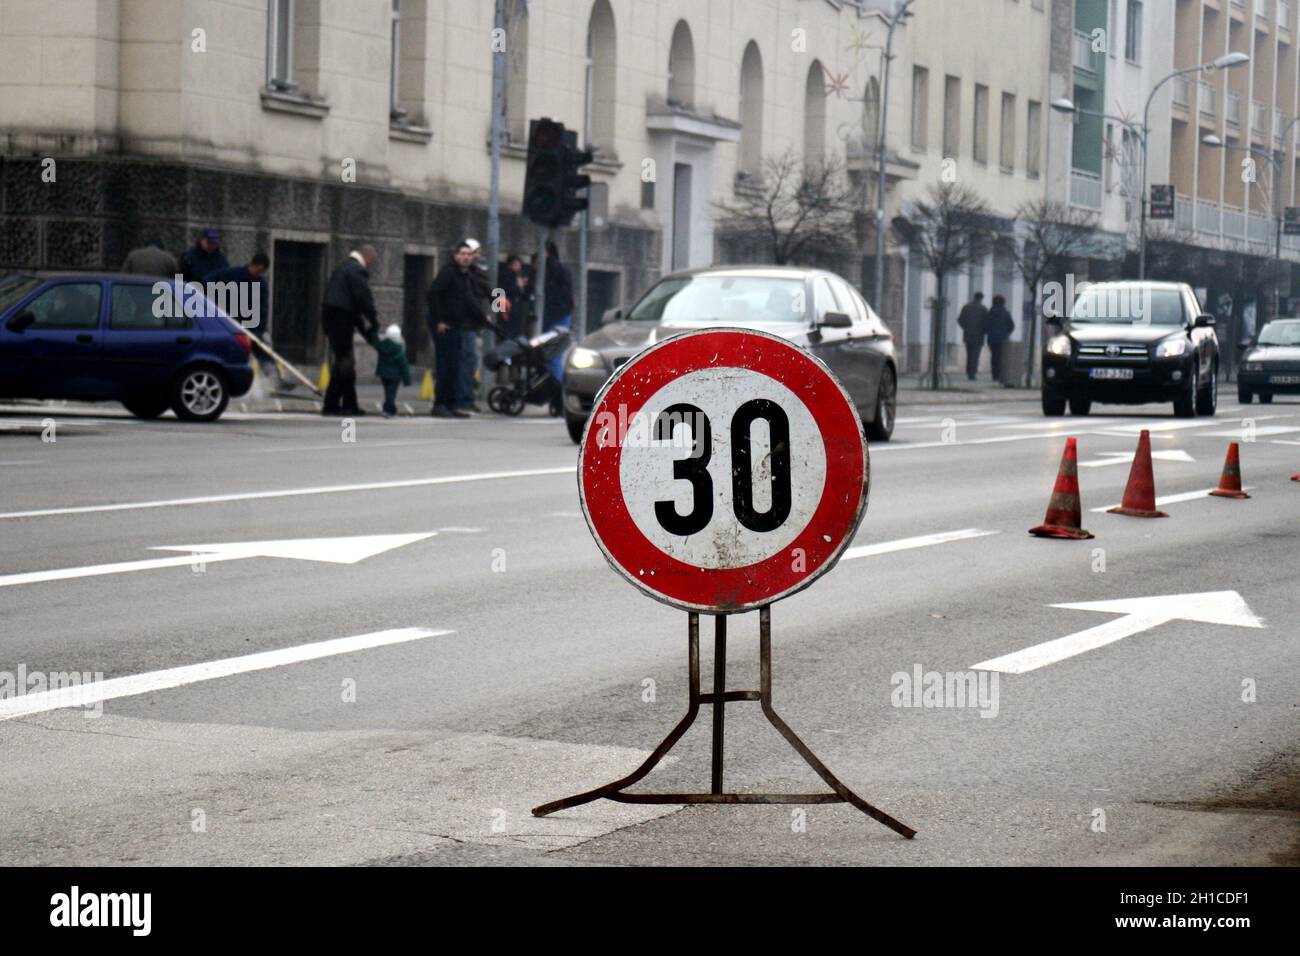 Lower speed of 30 kmh traffic sign in the street Stock Photo